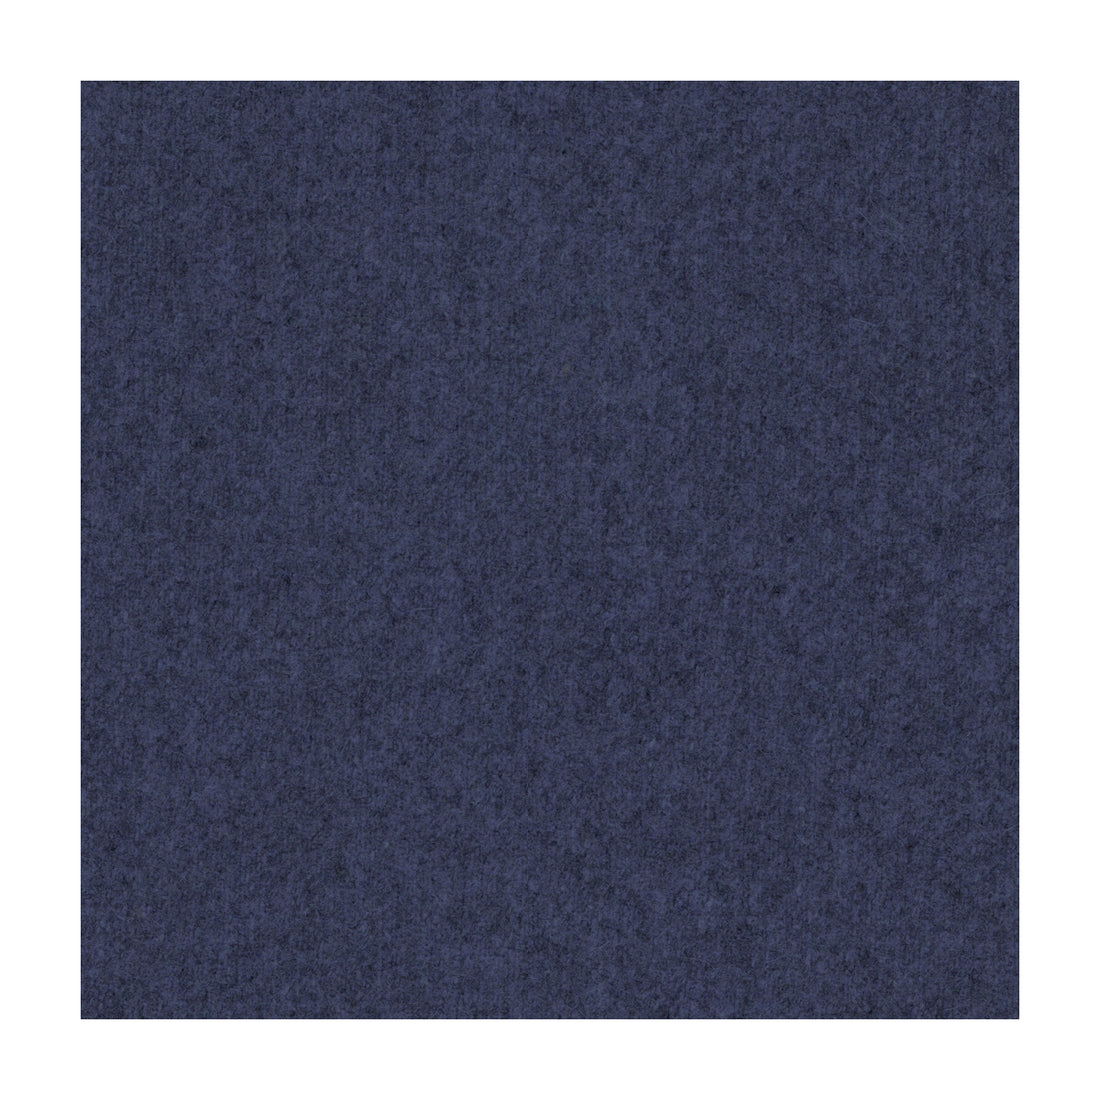 Jefferson Wool fabric in blueberry color - pattern 34397.5.0 - by Kravet Contract